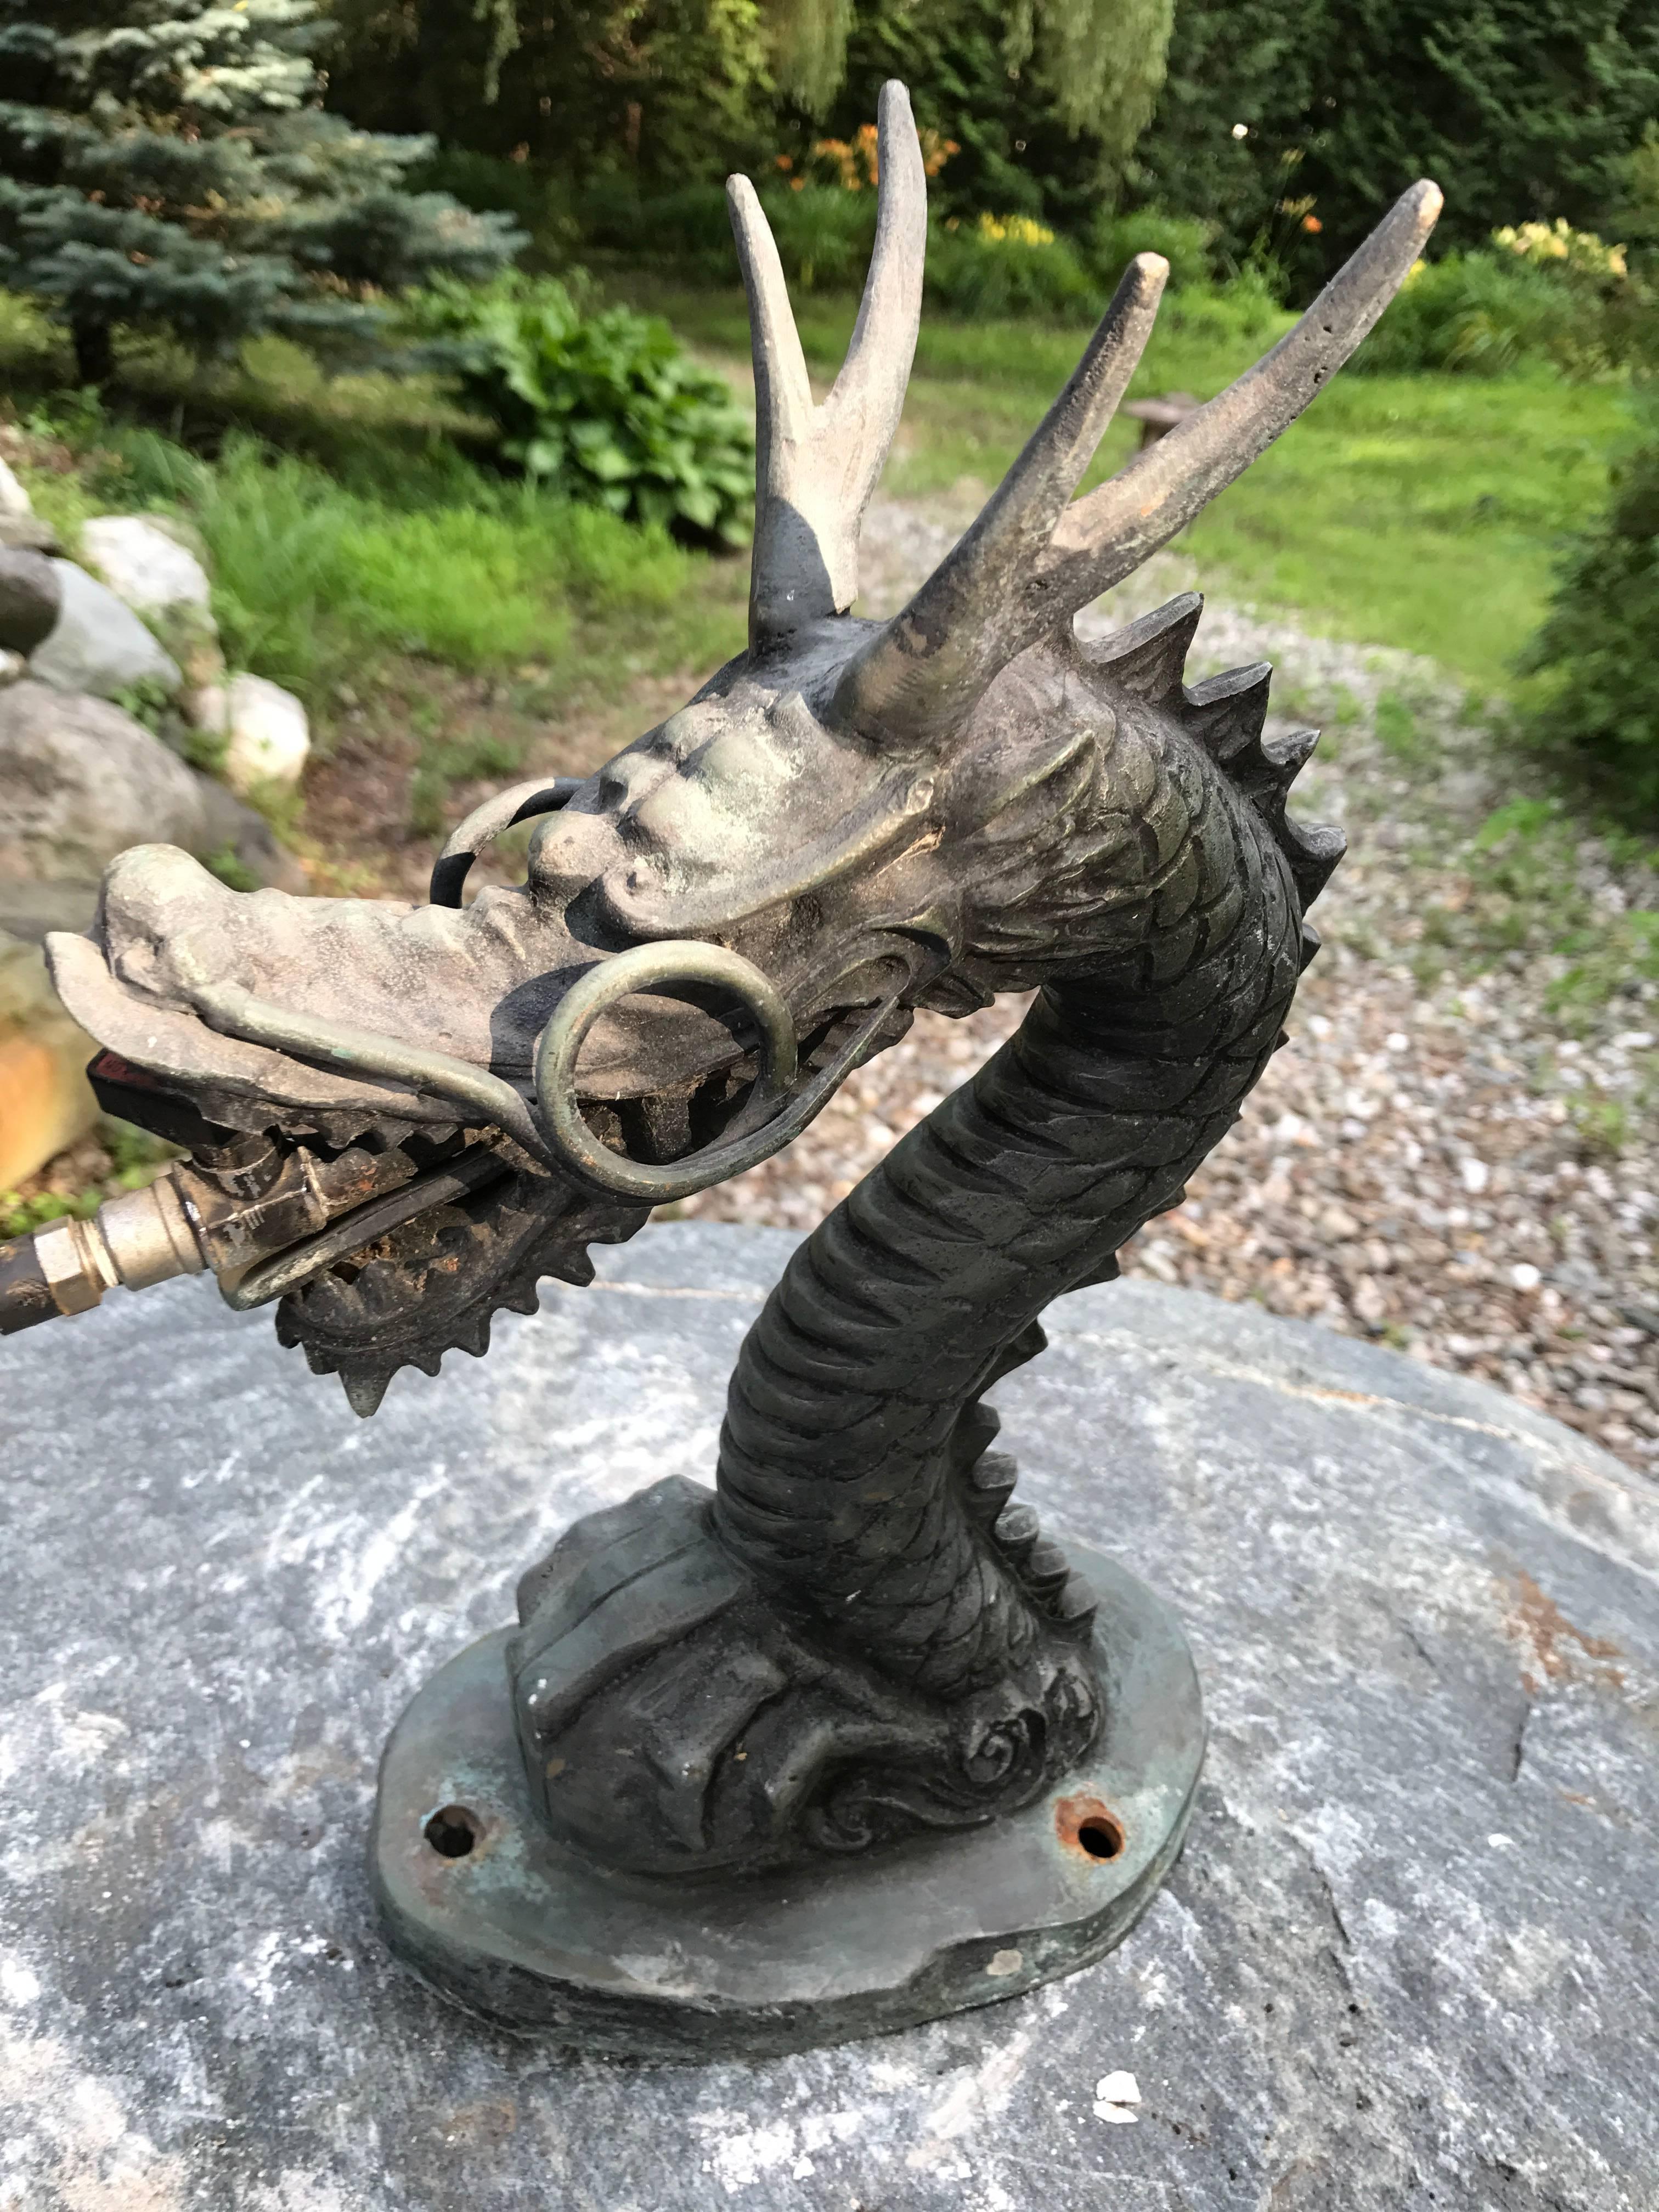 Japan, a hard to find hand caste, hand-wrought bronze dramatic dragon sculpture constructed for/as a temple basin spout - formerly attached to a stone or bronze basin. It possesses excellent detail and retains the old water tube attachment and with